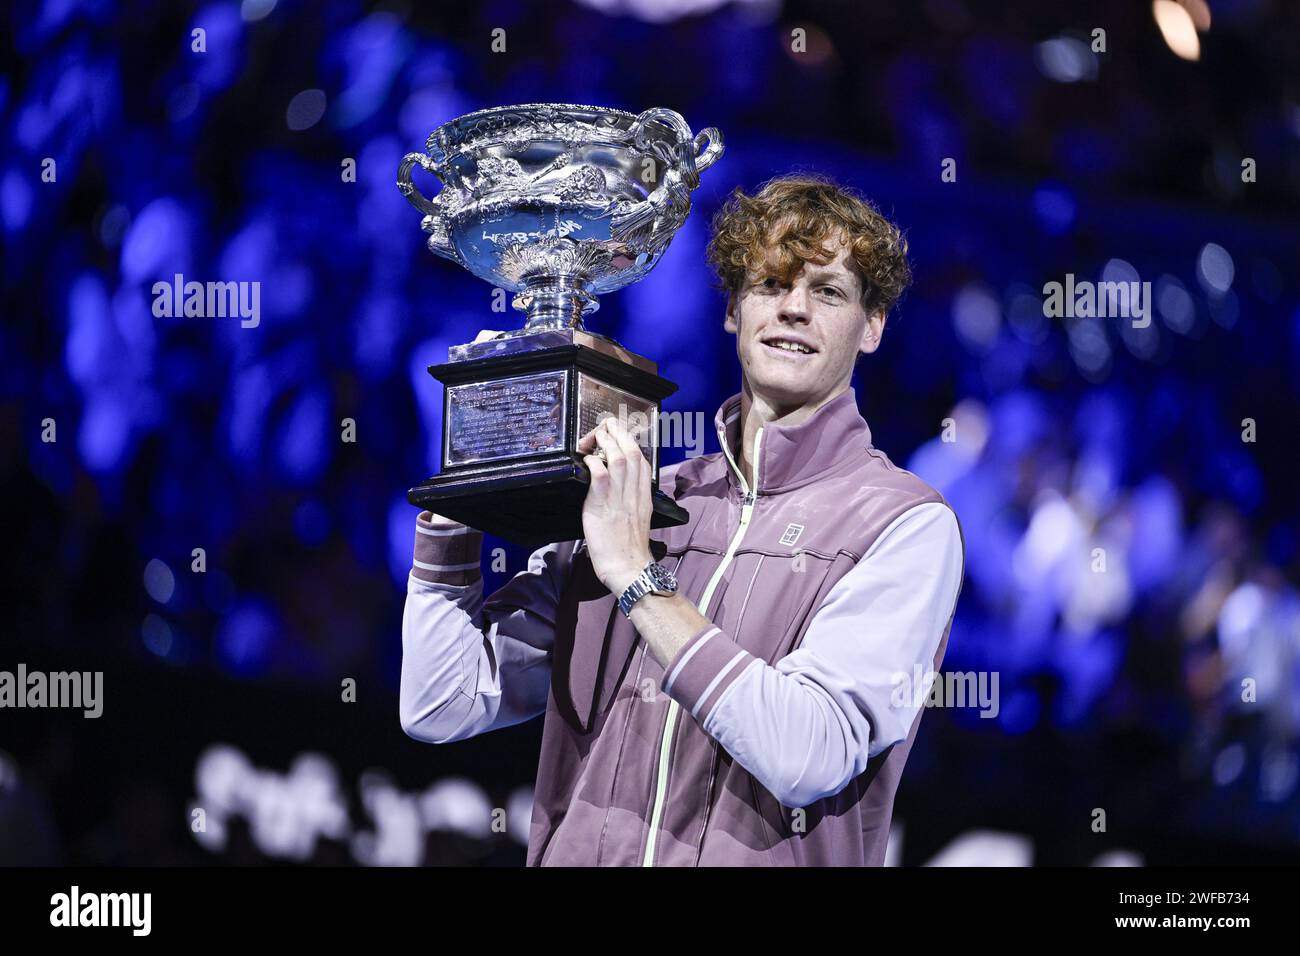 Jannik Sinner of Italy with the Norman Brookes cup trophy during the Australian Open AO 2024 men's final Grand Slam tennis tournament on January 28, 2024 at Melbourne Park in Australia. Photo Victor Joly / DPPI Stock Photo